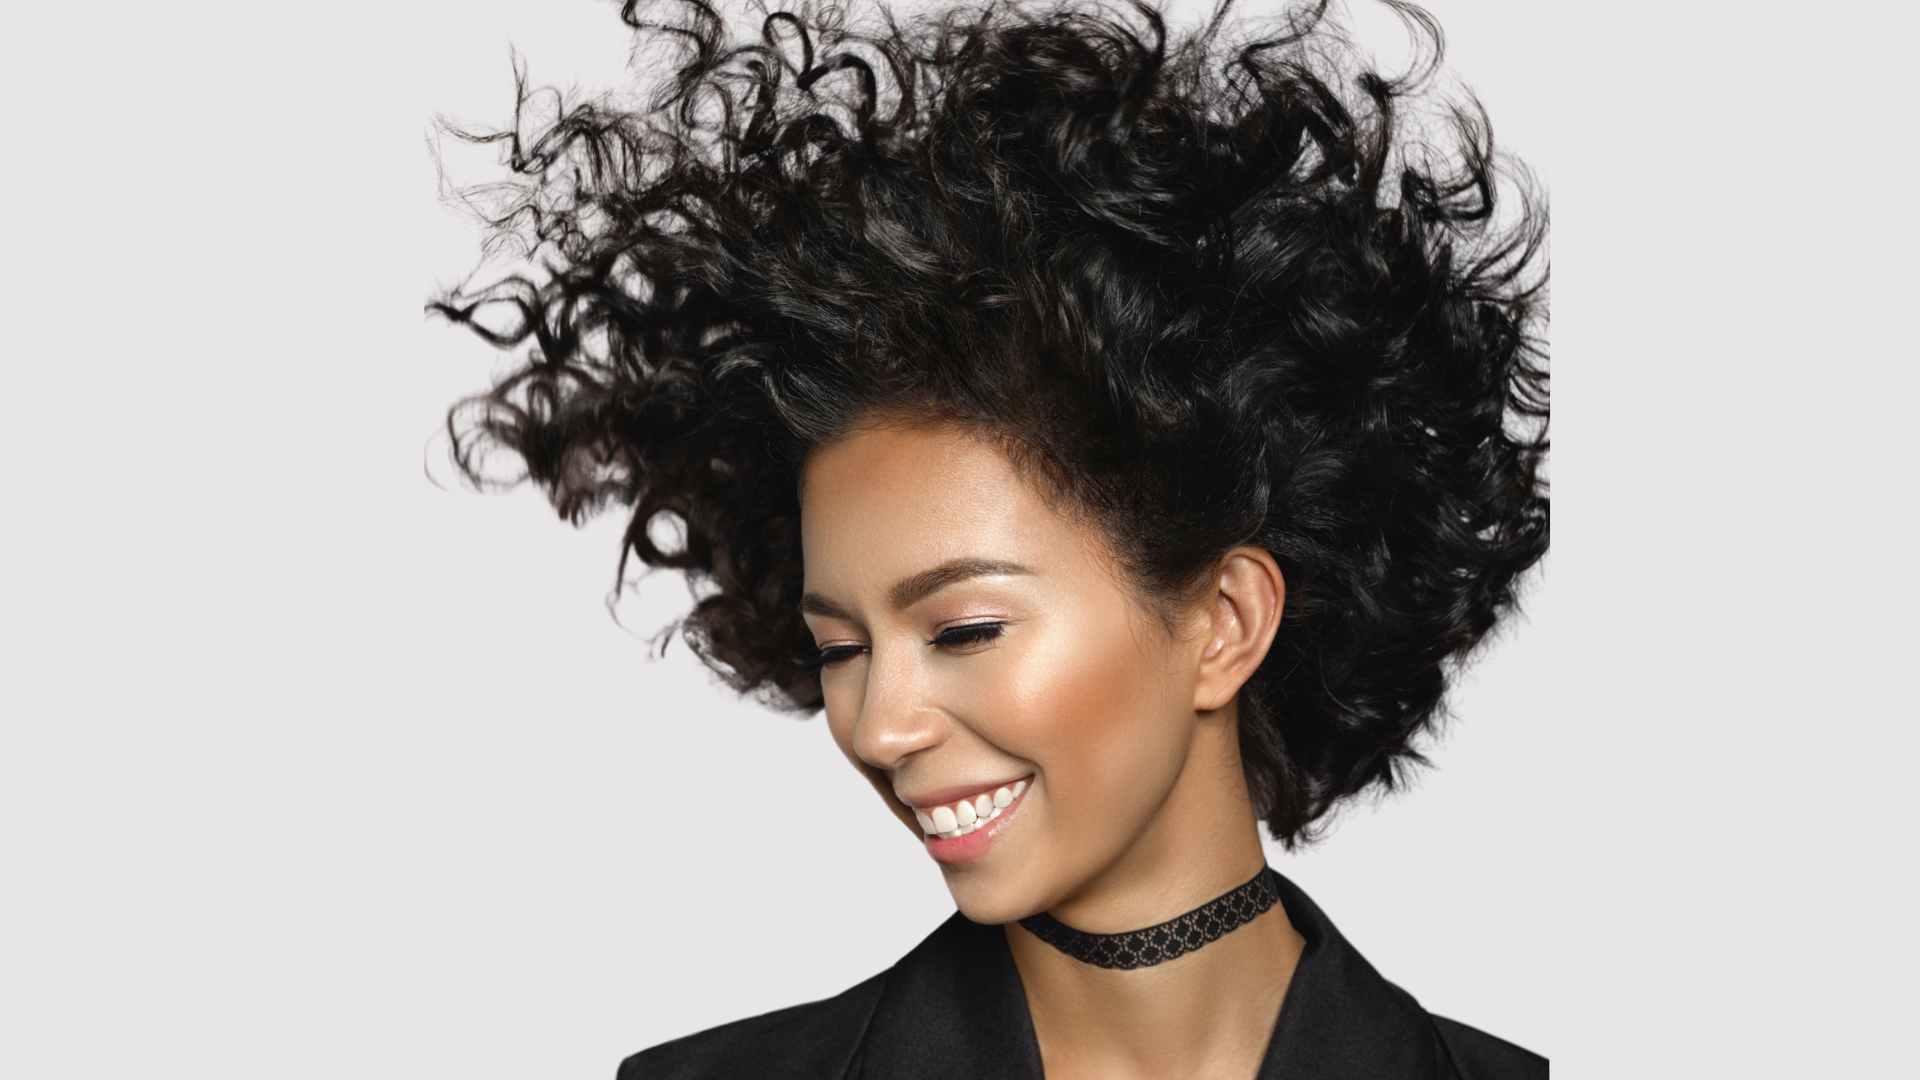 smiling female, eyes closed, black curly hair styled and lifted with sugar spray styling mist